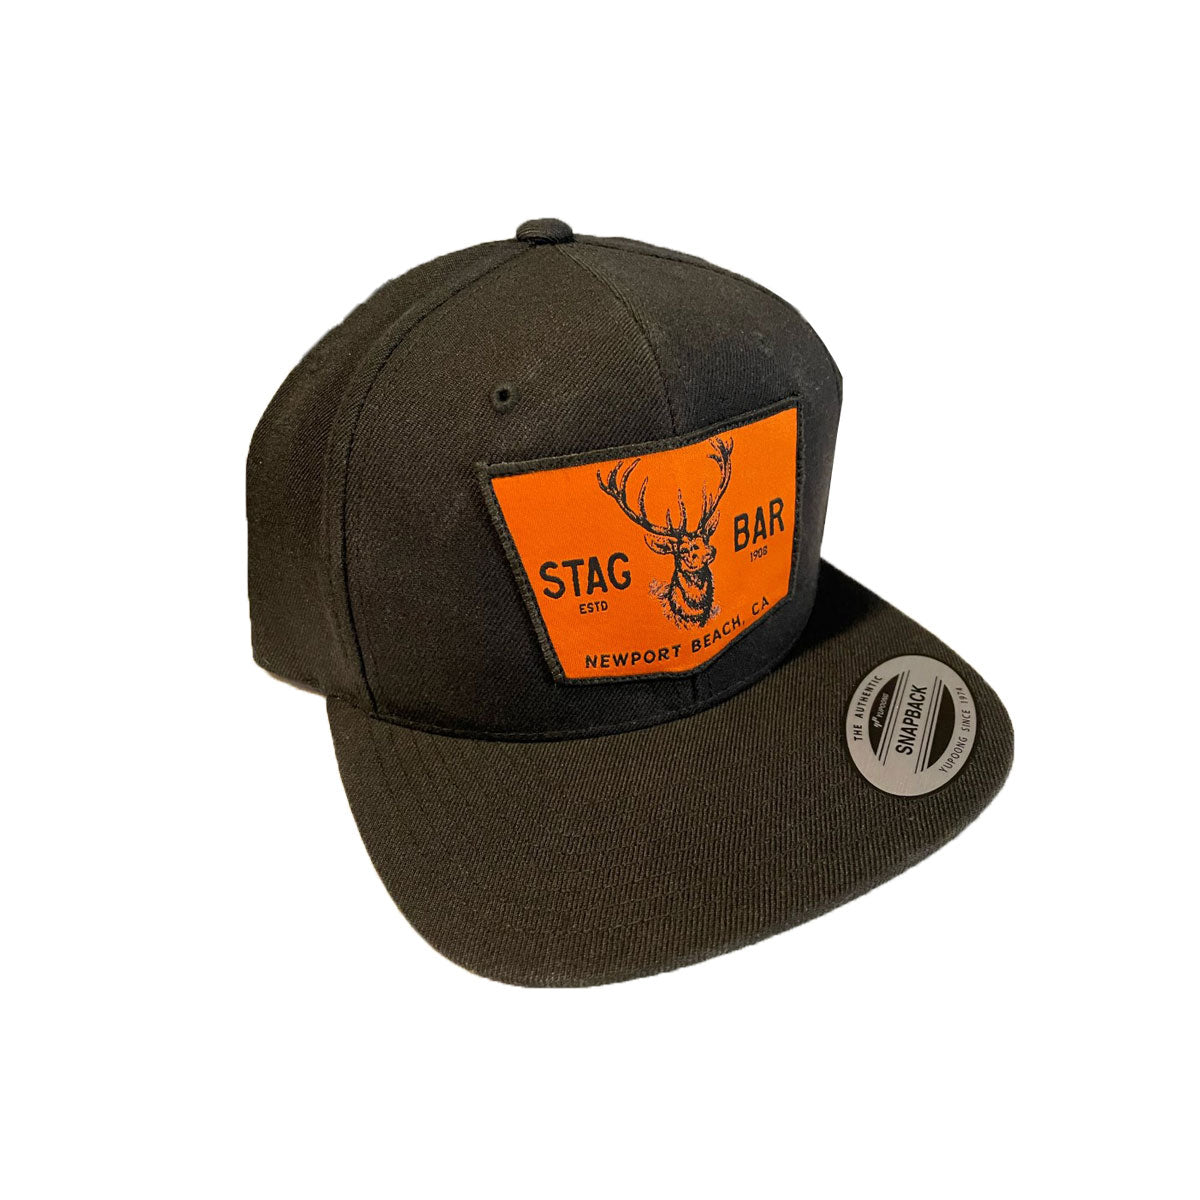 Stag Patch Hat - Black